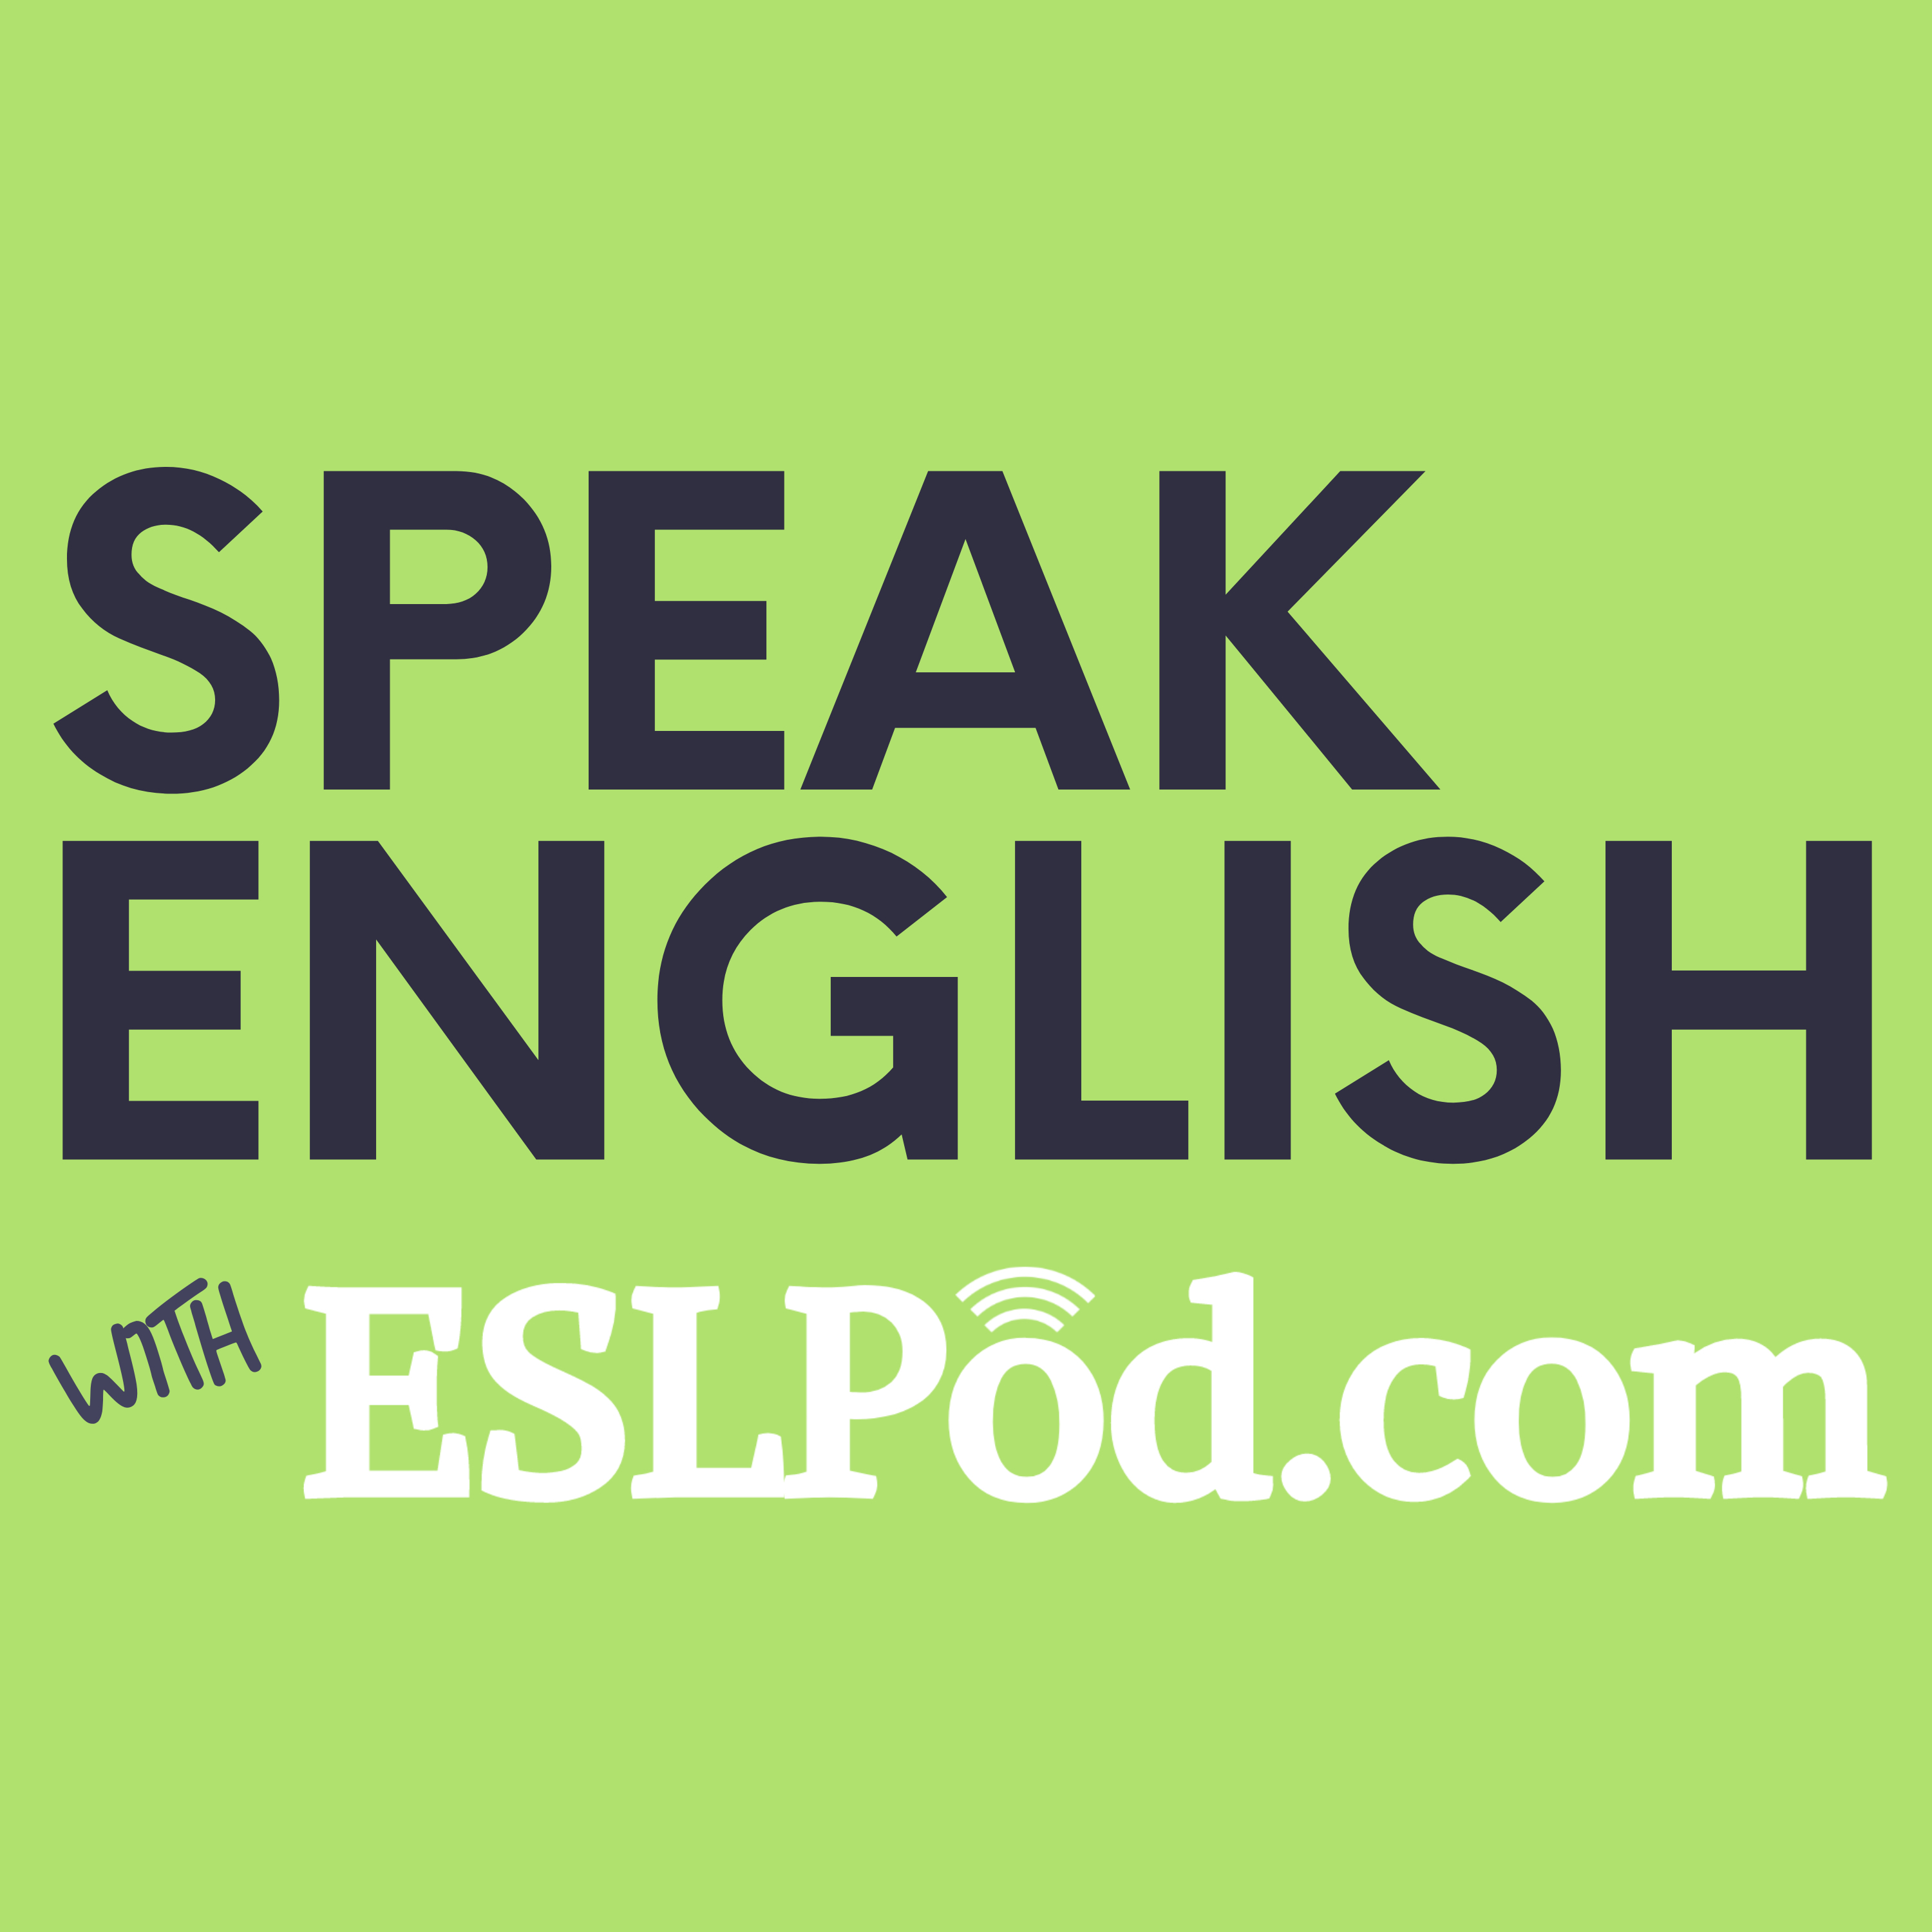 english-as-a-second-language-esl-podcast-learn-english-online